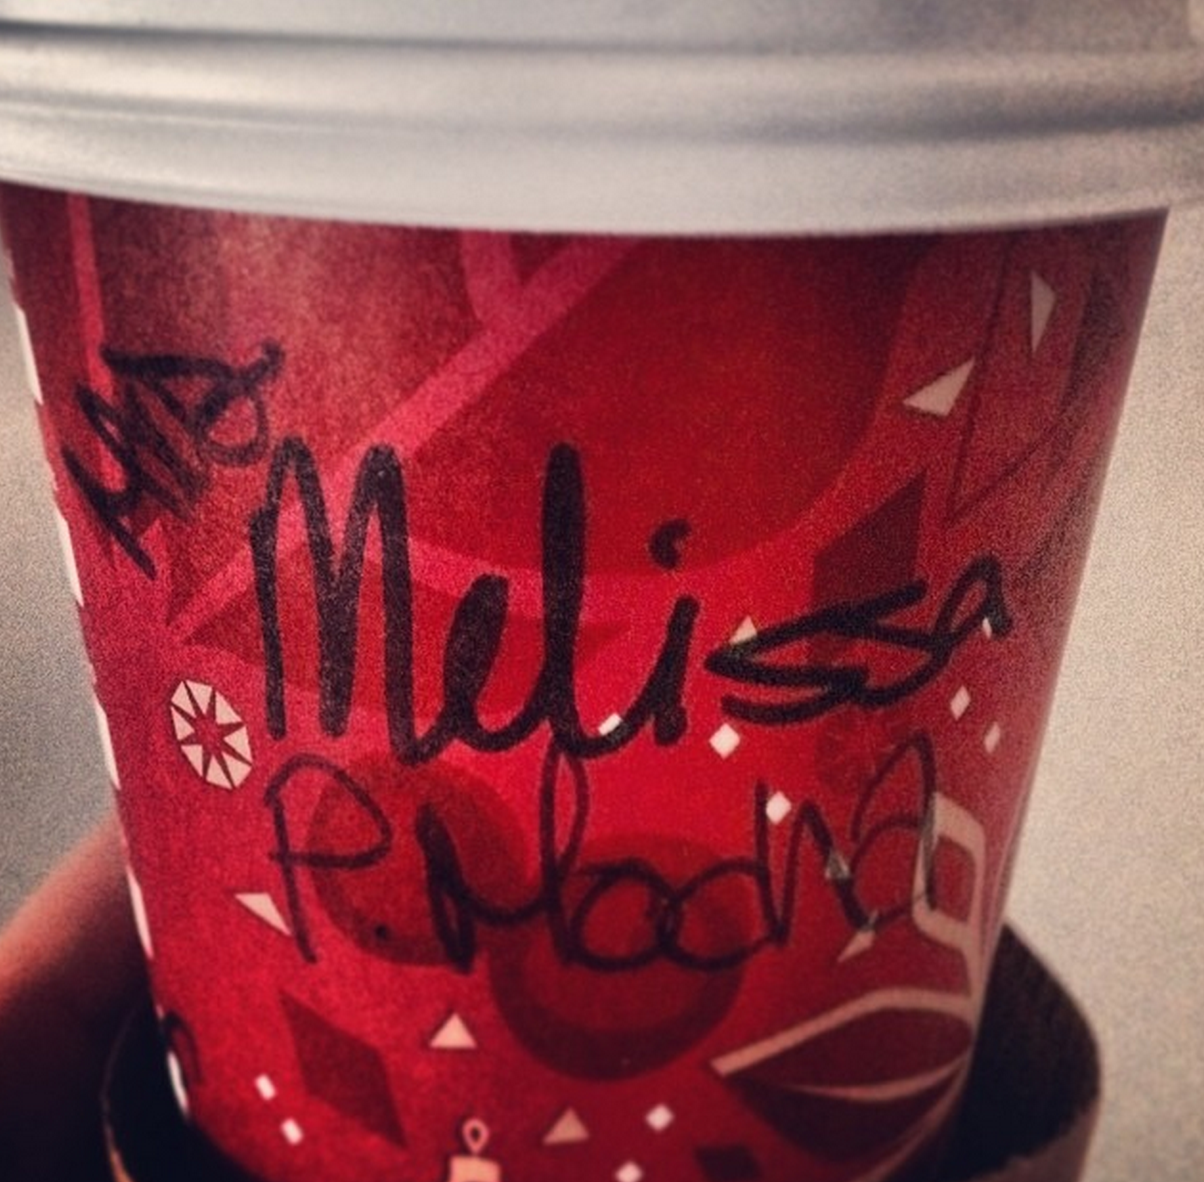 I recently married a peppermint mocha, come on, Starbucks...